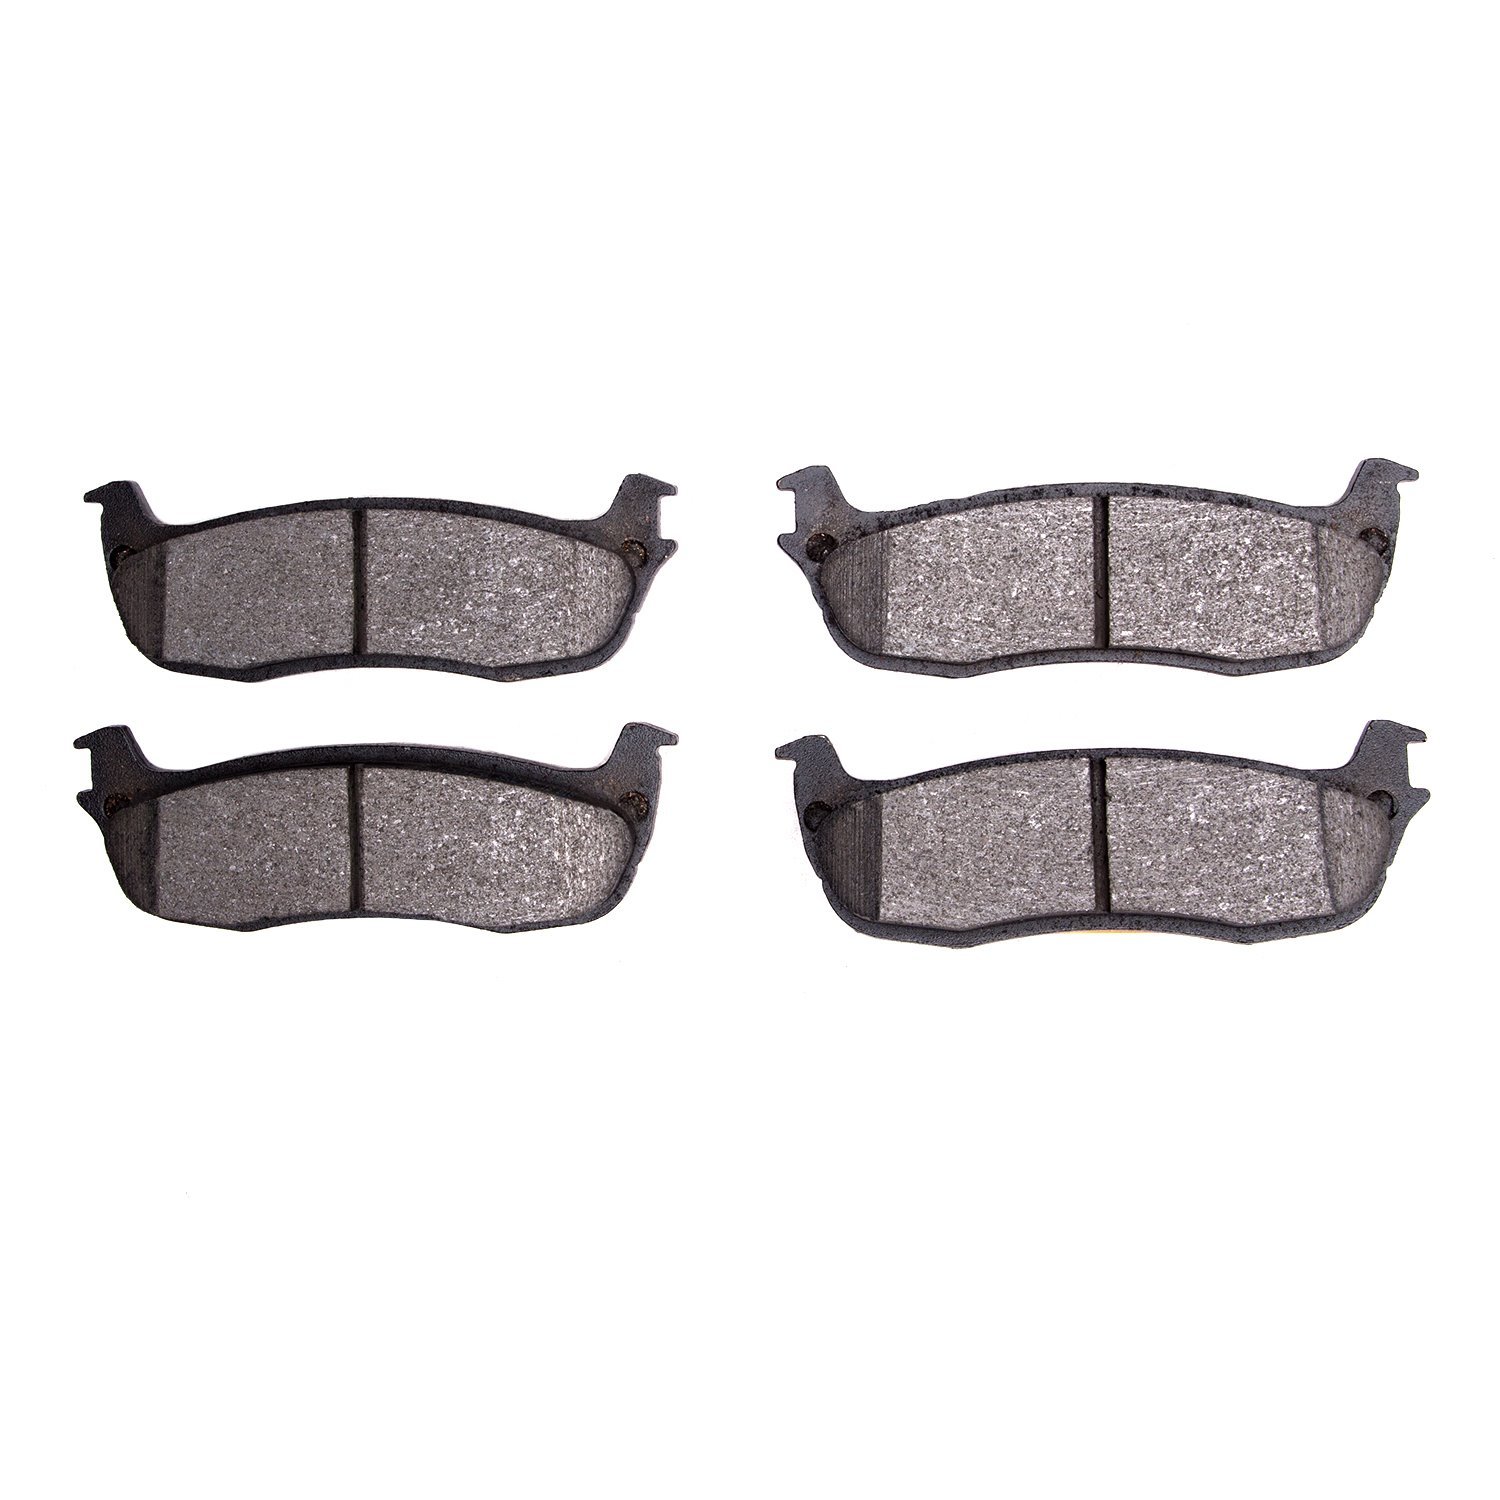 1400-0711-00 Ultimate-Duty Brake Pads Kit, 1997-2011 Ford/Lincoln/Mercury/Mazda, Position: Rear